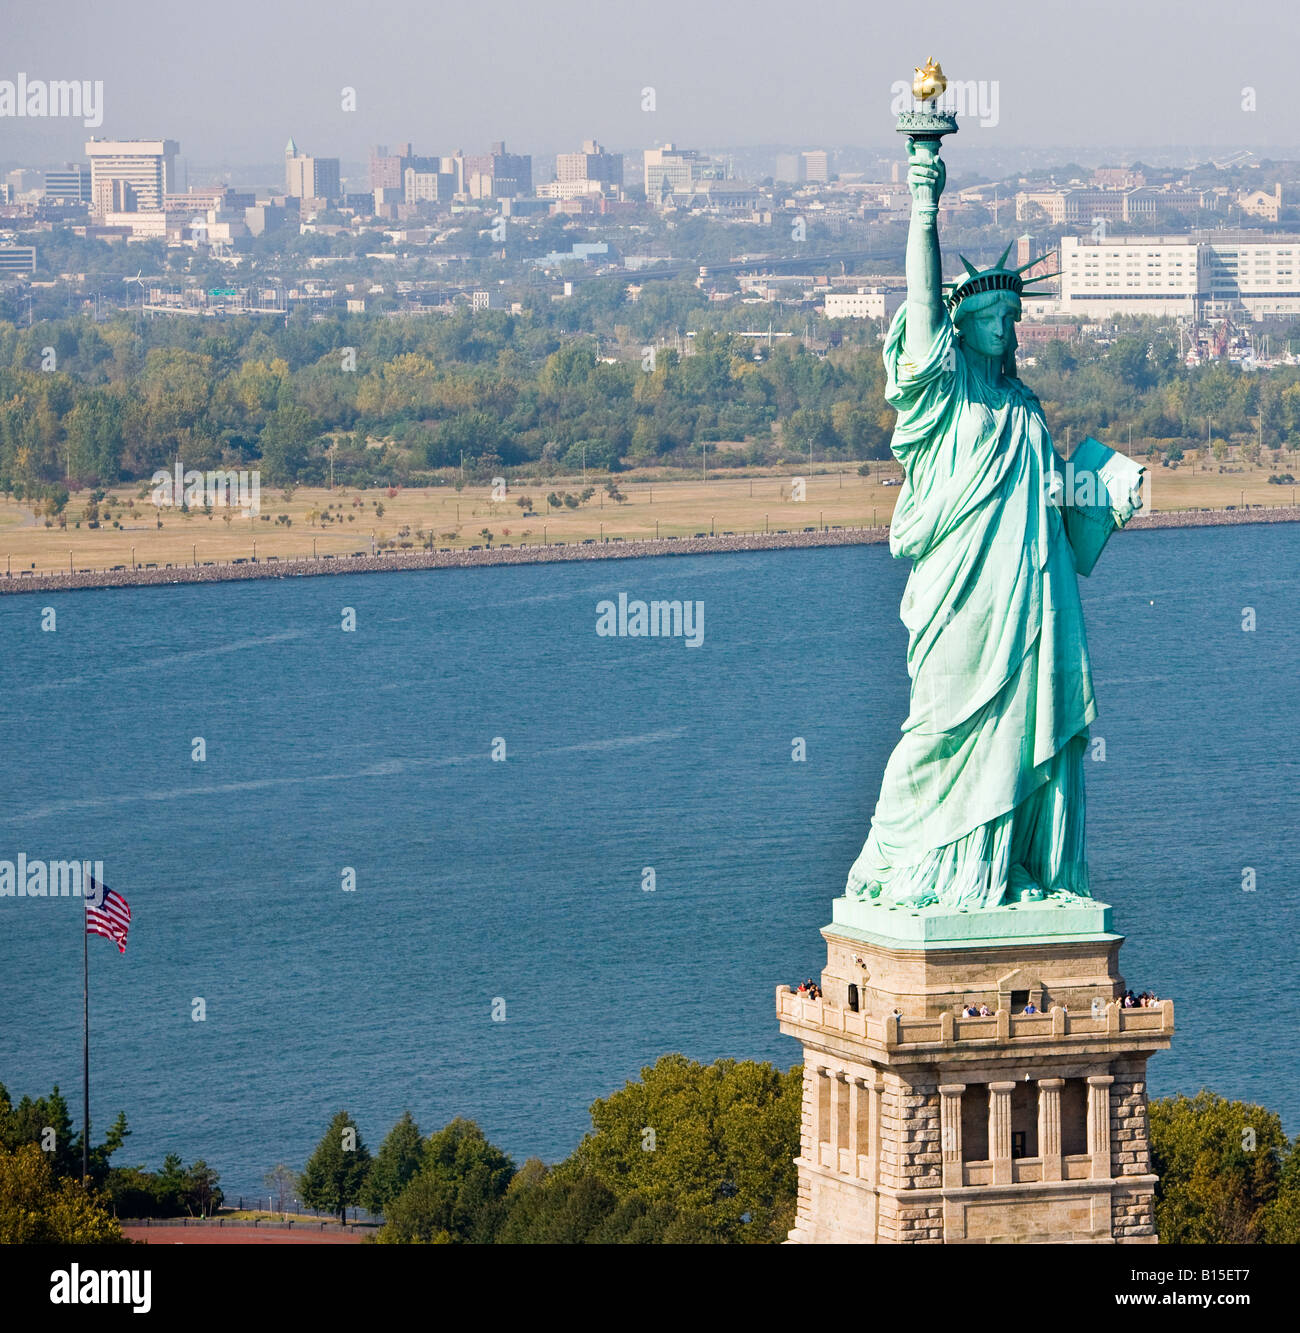 Liberty and New Jersey Stock Photo 